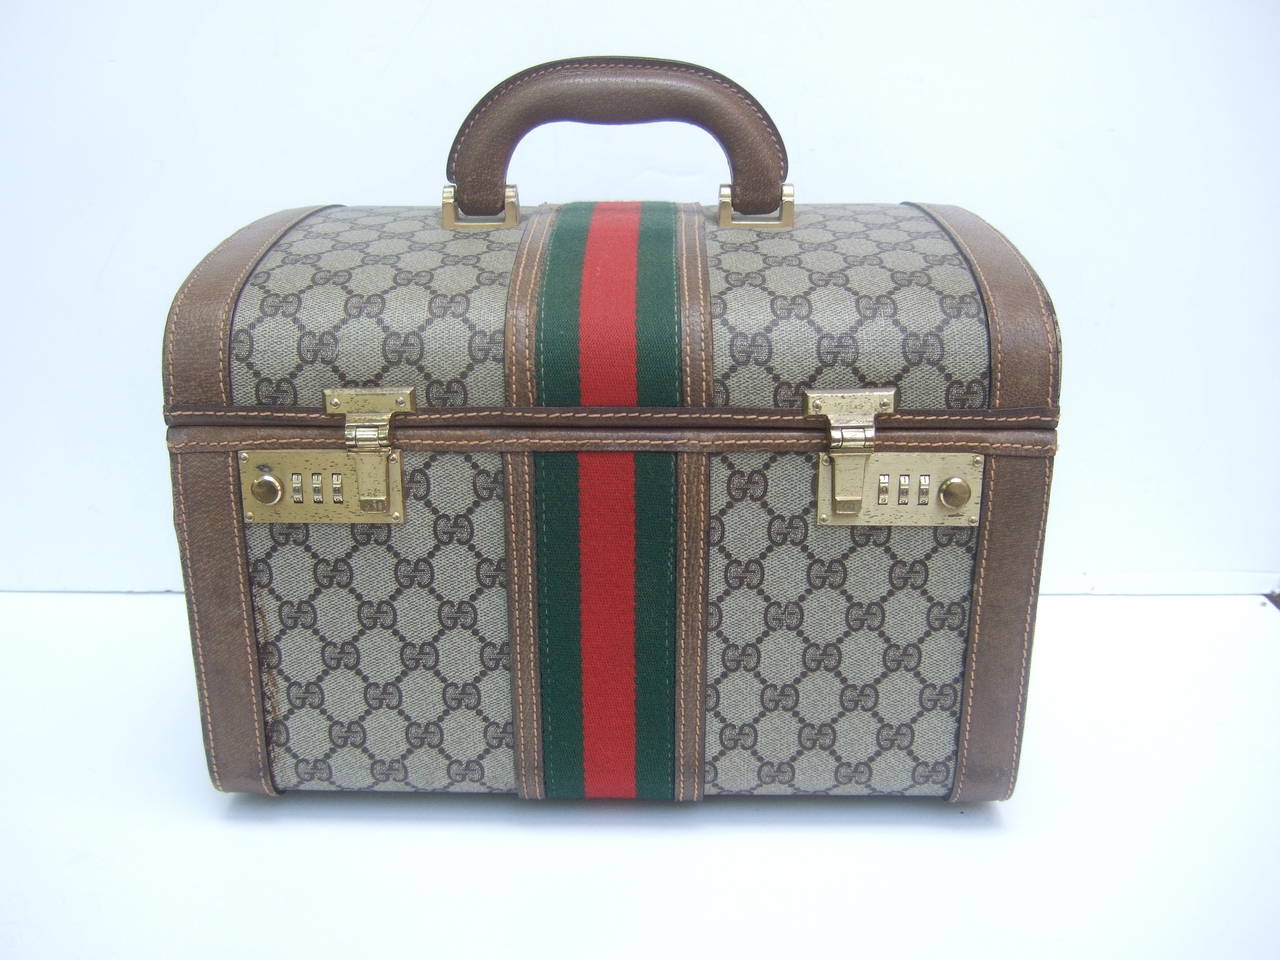 ***RESERVED SALE PENDING FOR CARMEL DANIELS***

Gucci Luxurious retro travel train case. Made in Italy c 1970s
The Italian vanity travel case is designed with Gucci's  
monogrammed logo covering with brown leather trim

The center of the